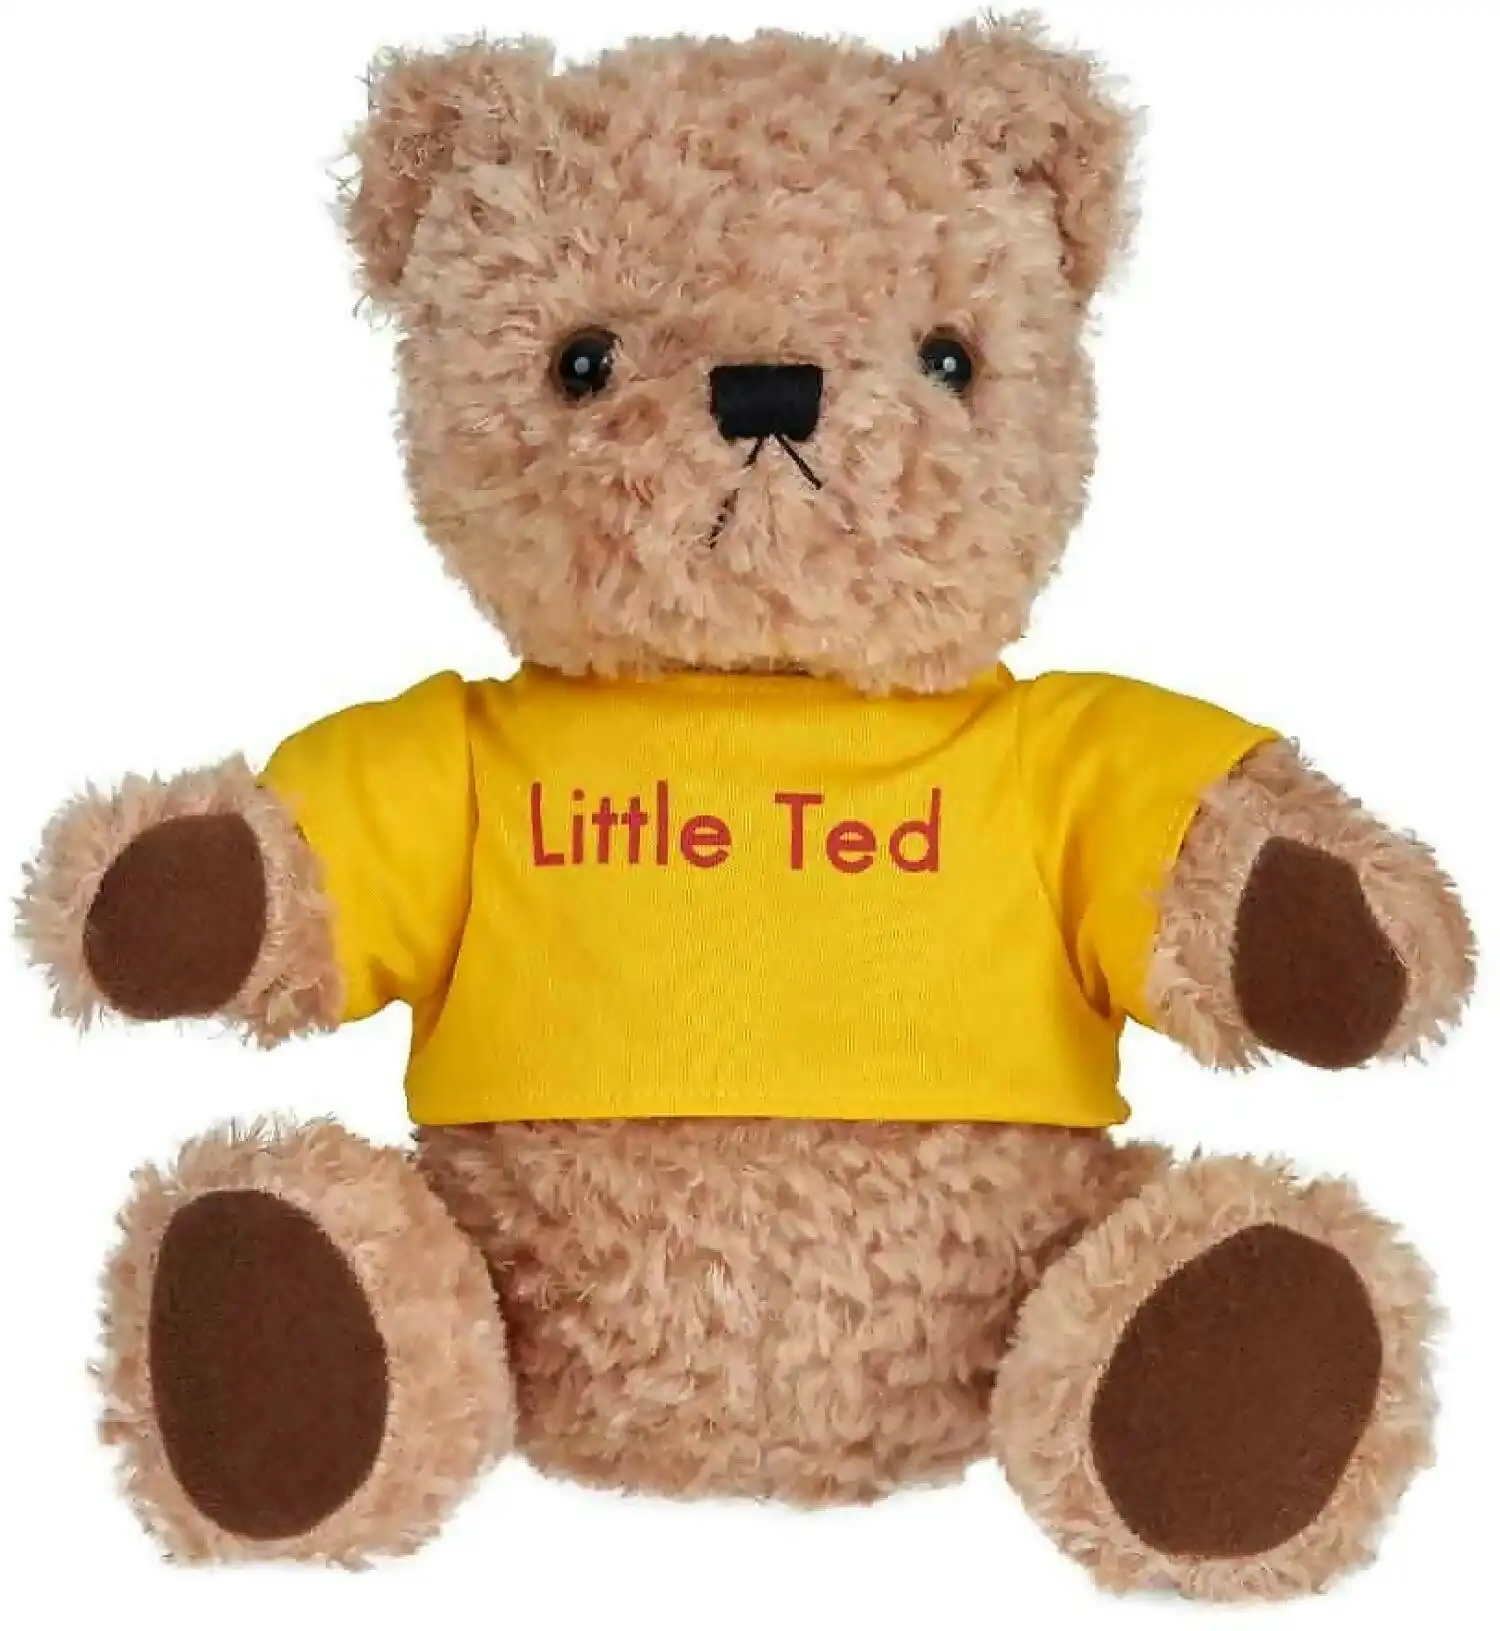 Play School - Little Ted Plush Soft Toy Doll 22cm